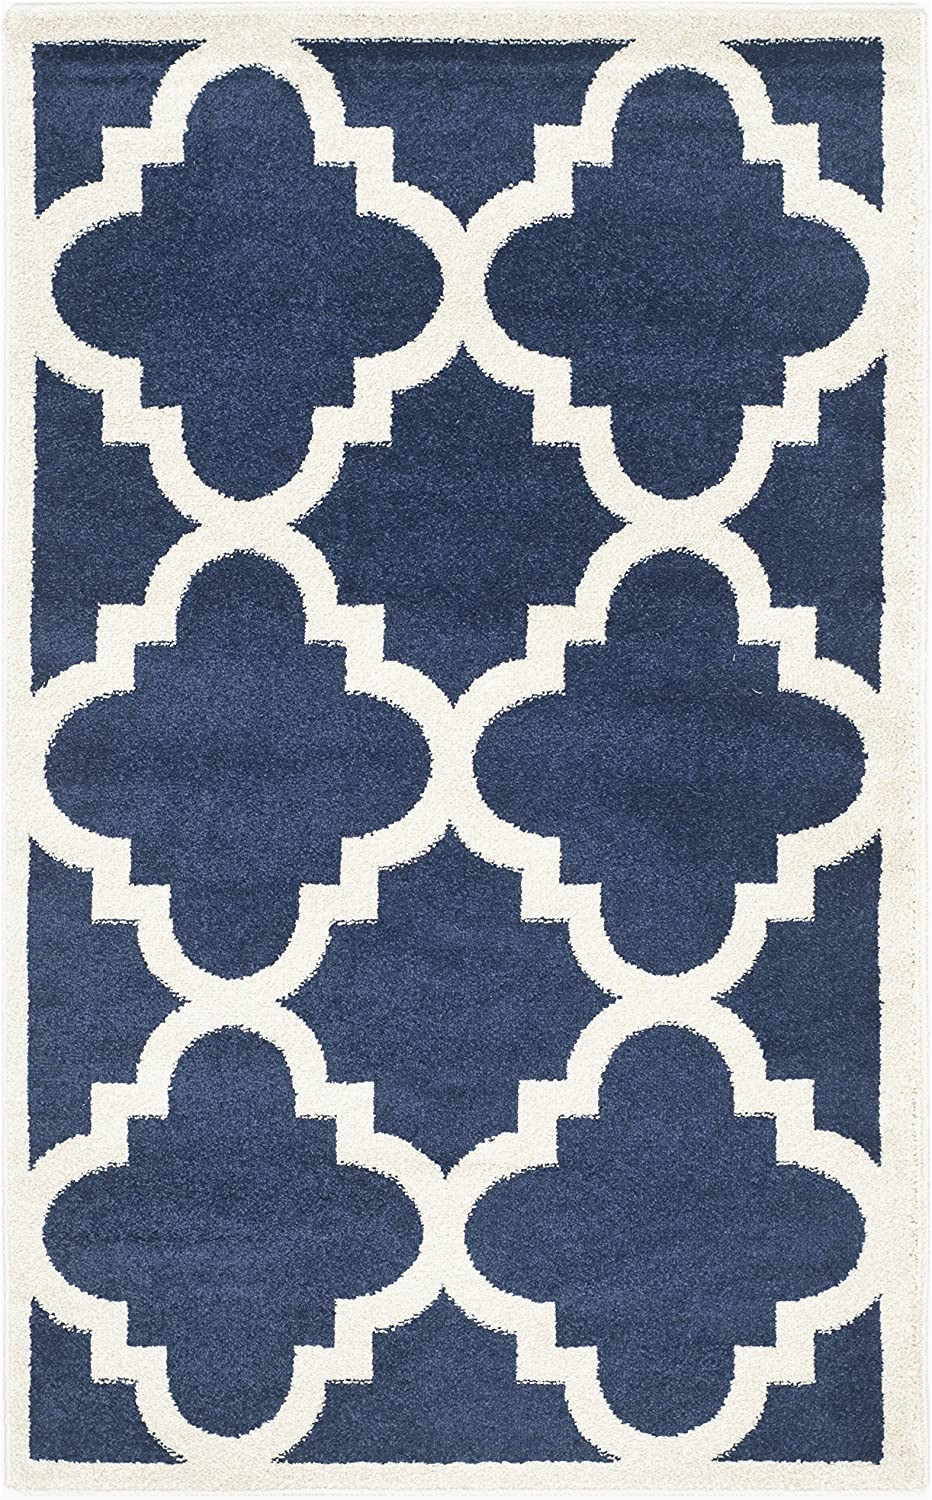 Safavieh Navy Blue Rug Safavieh Amherst Collection Amt423p Navy and Beige area Rug 2 Feet 6 Inches by 4 Feet 26 X 4